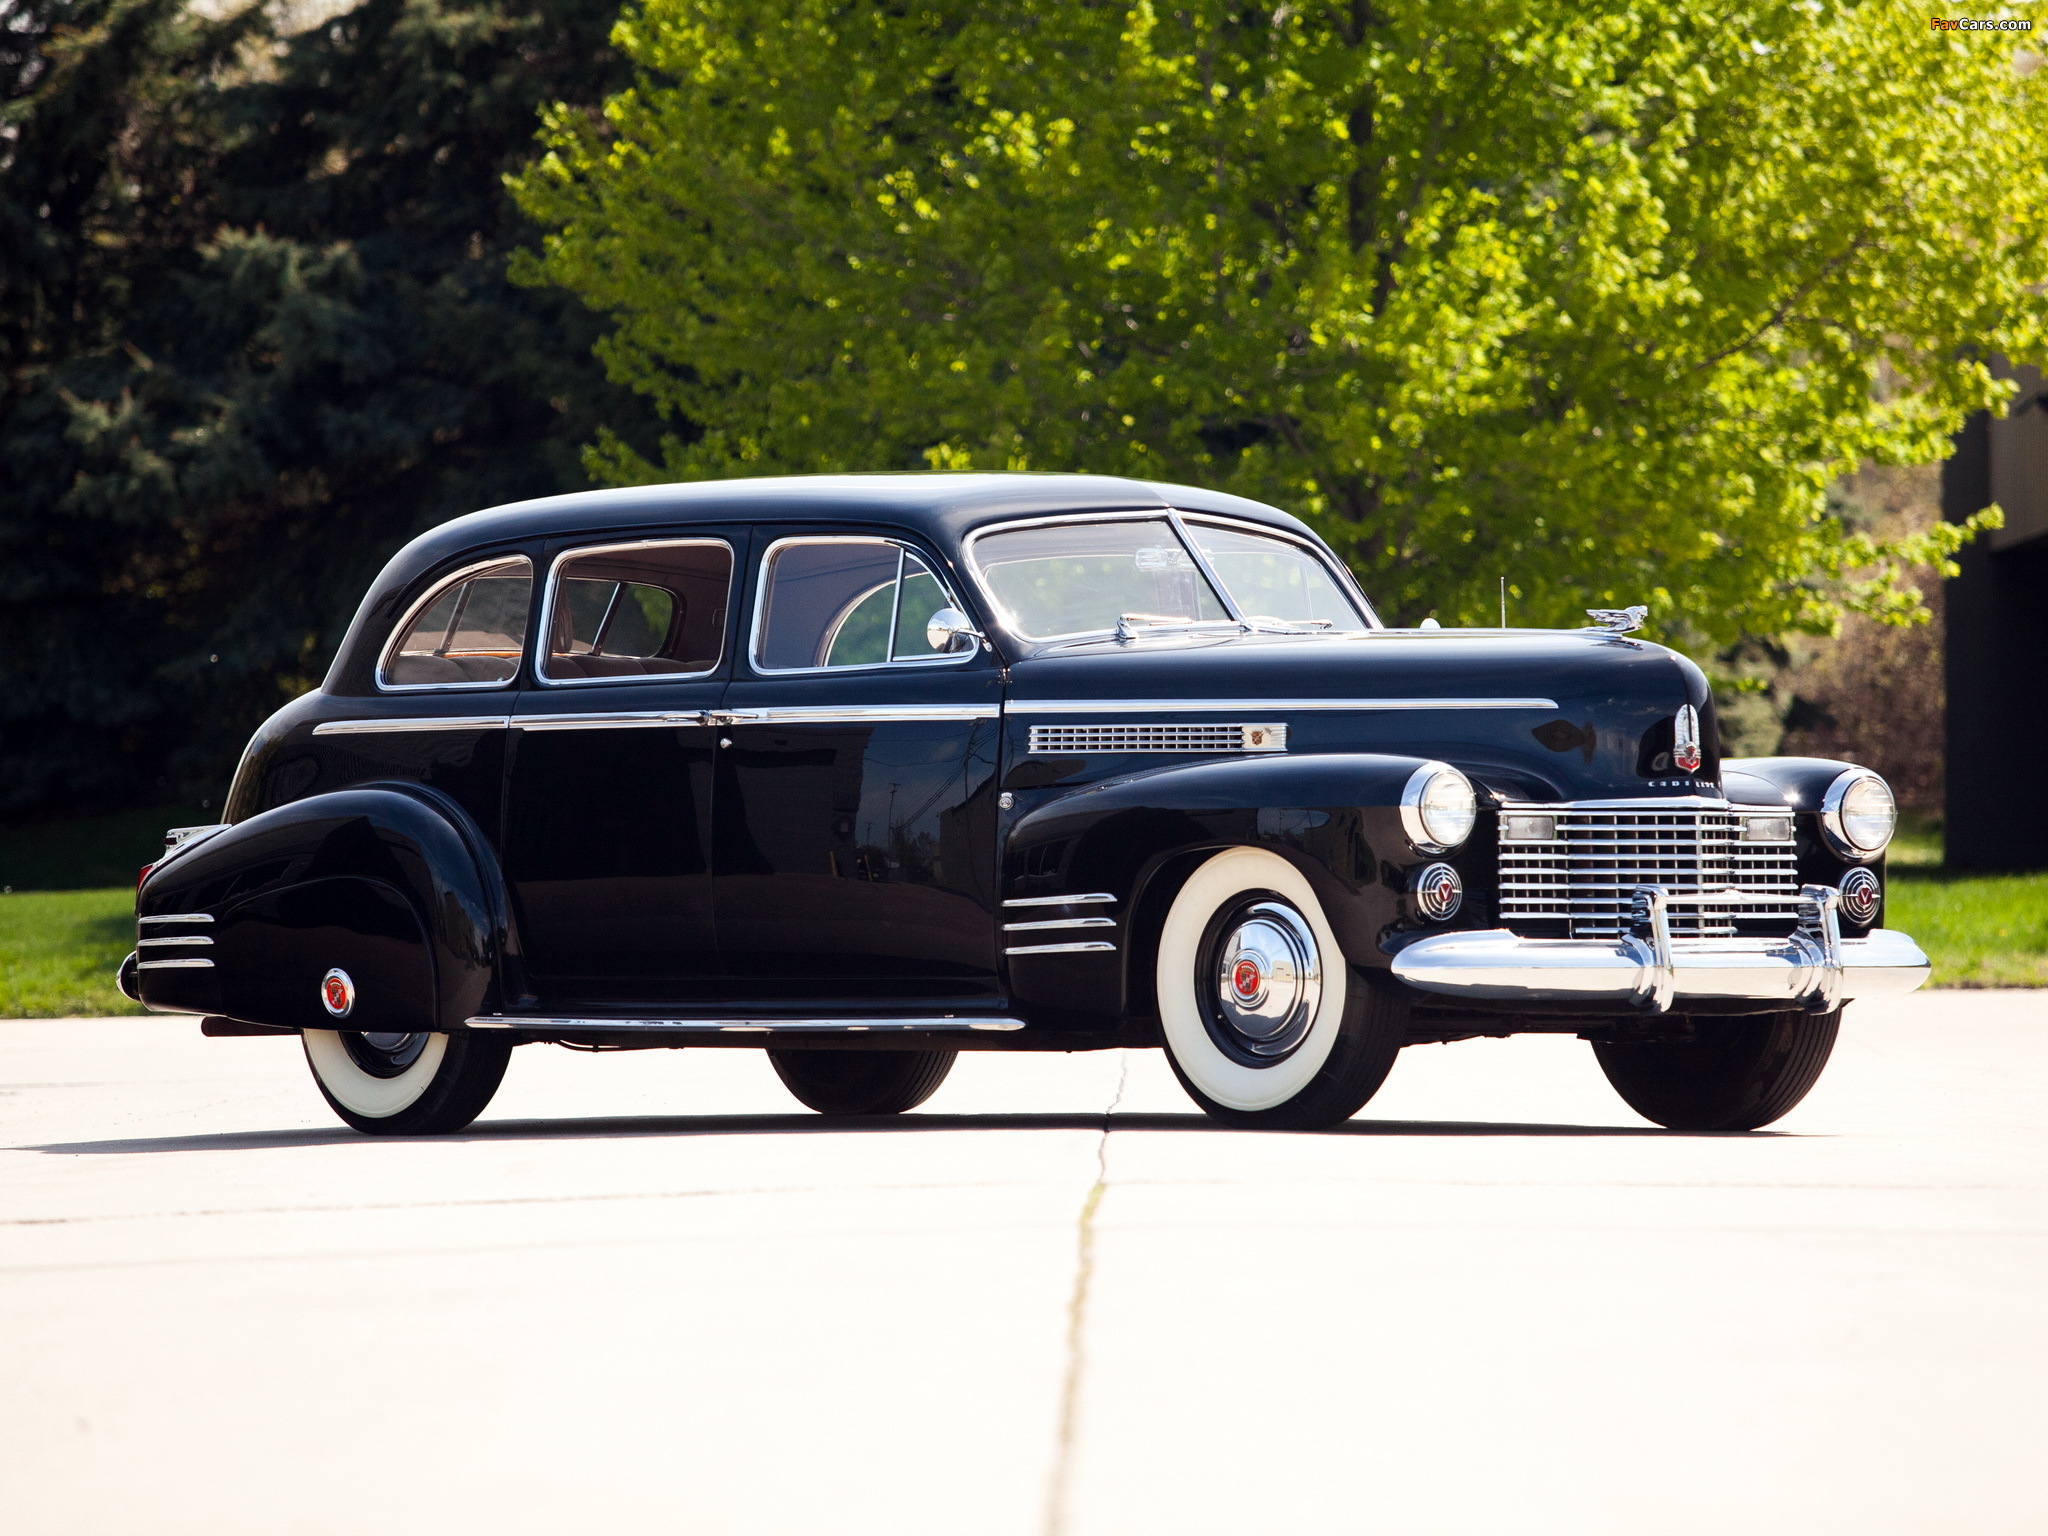 Pictures of Cadillac Fleetwood Seventy-Five Touring Sedan (41-7519) 1941 (2048 x 1536)